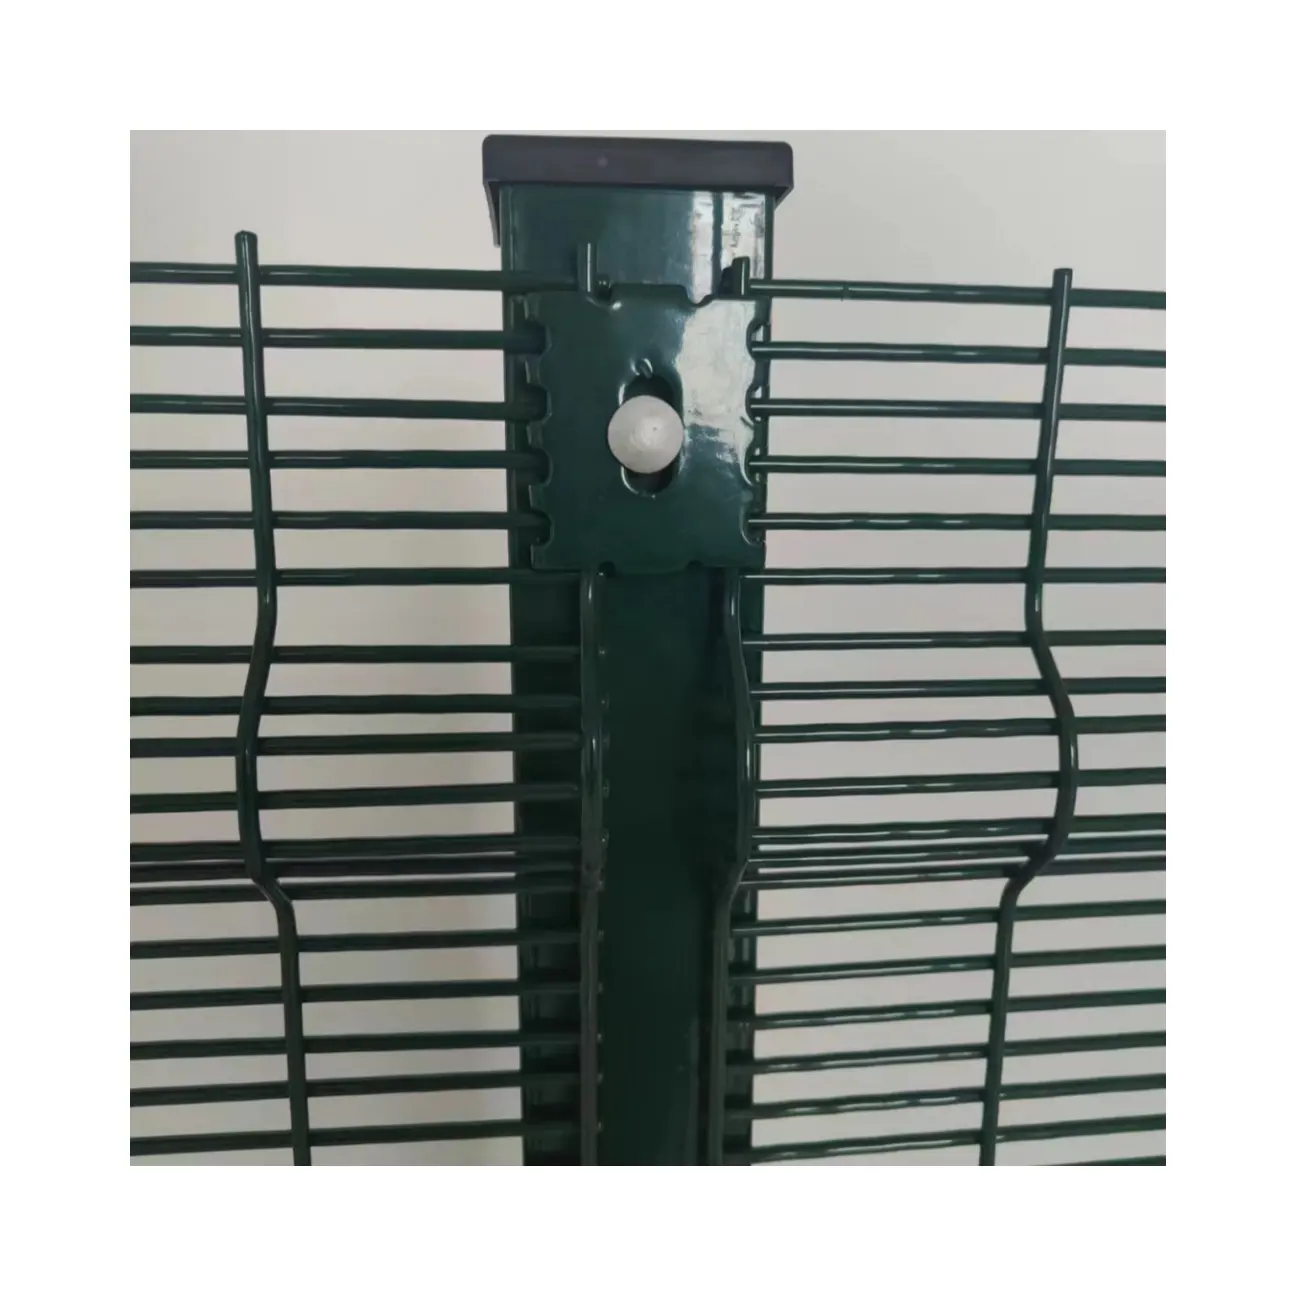 Hot Sale security powder coated galvanized security wall anti climb fencing spikes anti-climb fence metal steel wire